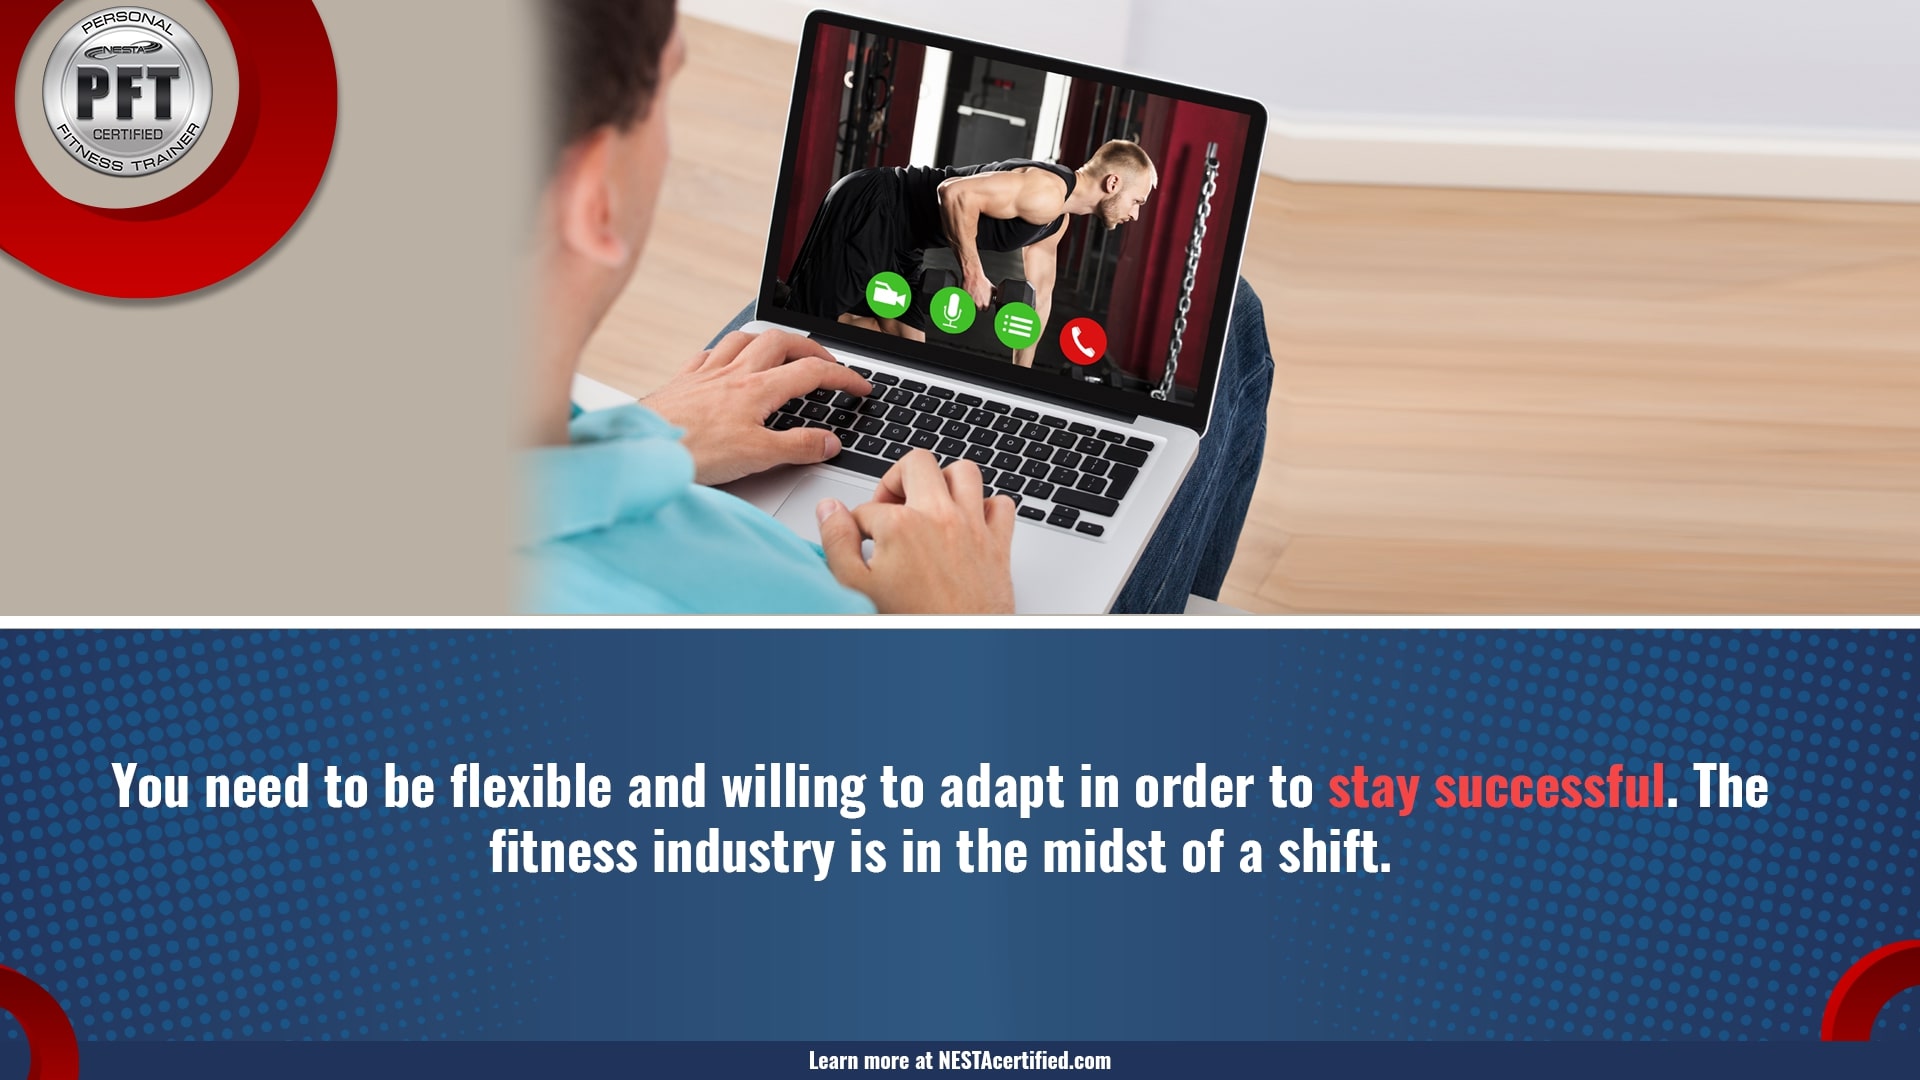 How Can Online Personal Trainers Help in Improving Work-life Balance?